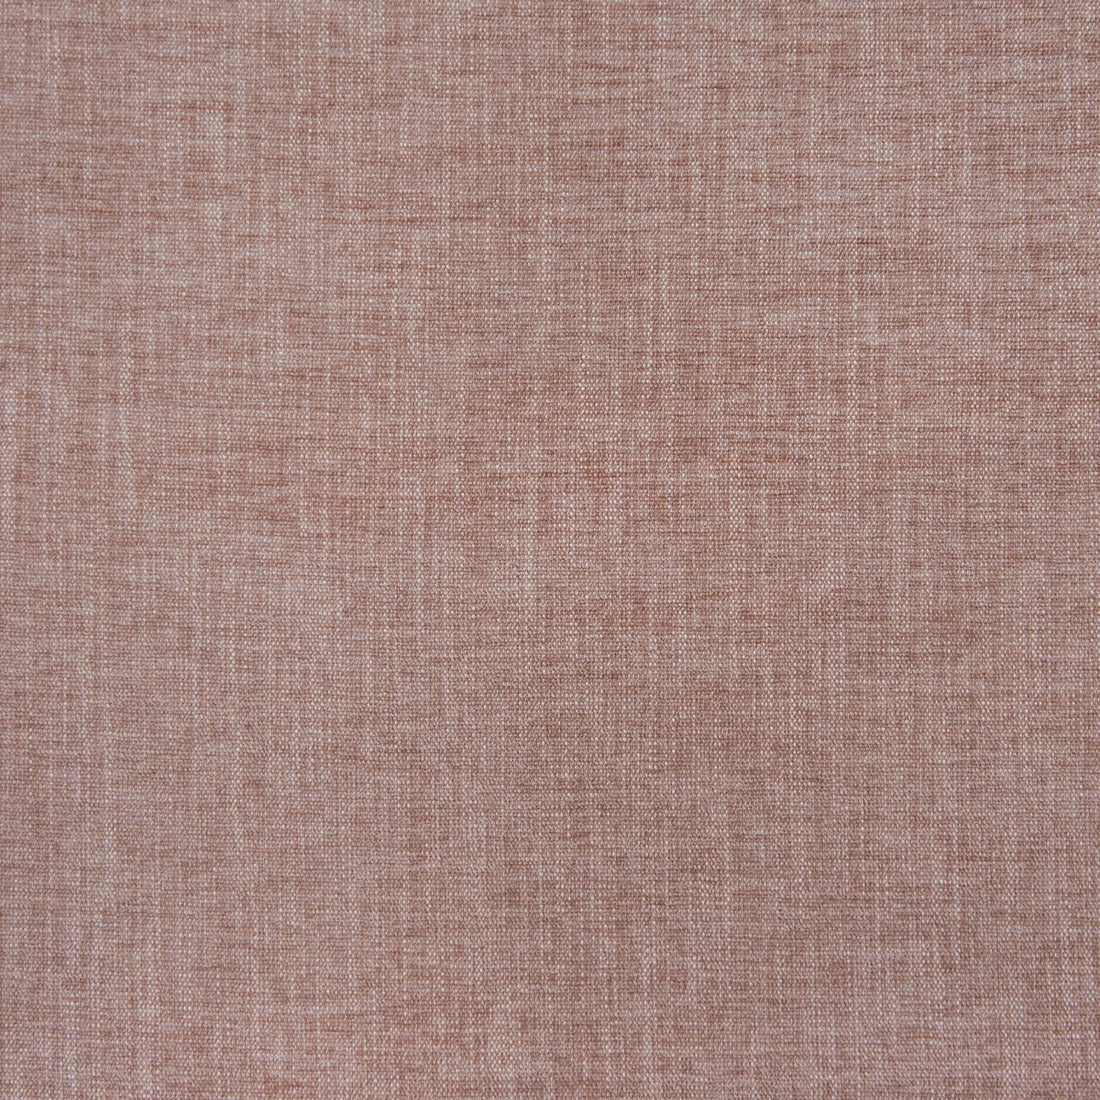 Moro fabric in rosa viejo color - pattern GDT5670.016.0 - by Gaston y Daniela in the Gaston Maiorica collection